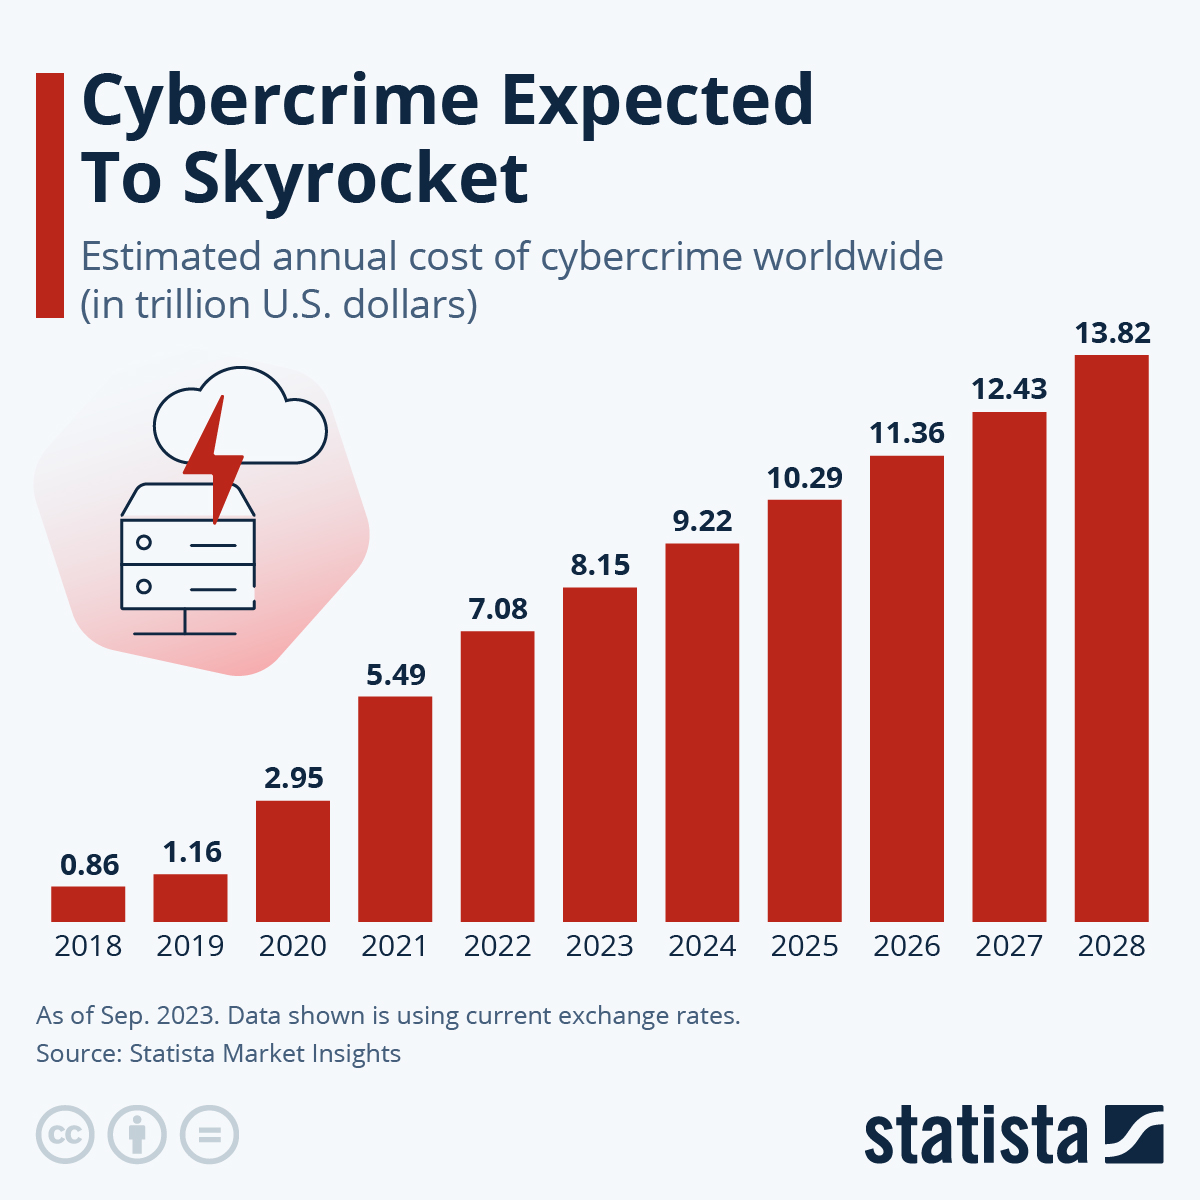 cybercrime-expected-to-skyrocket-chart.jpeg